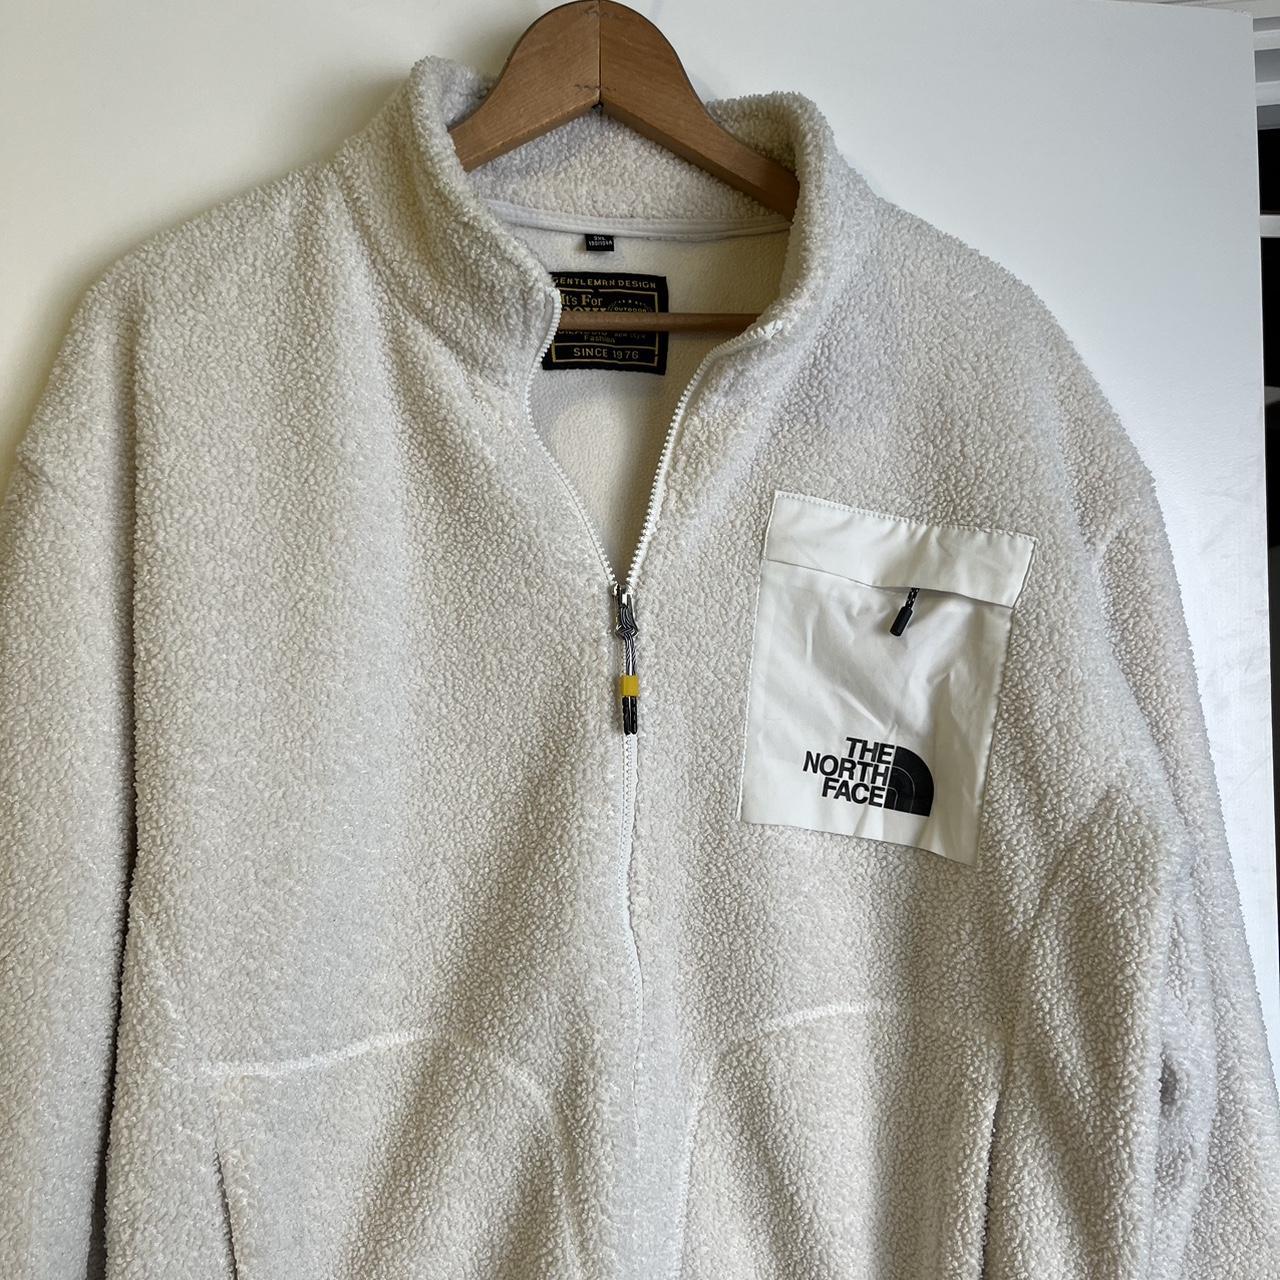 White north face style fleece zip up. Size 3XL but... - Depop